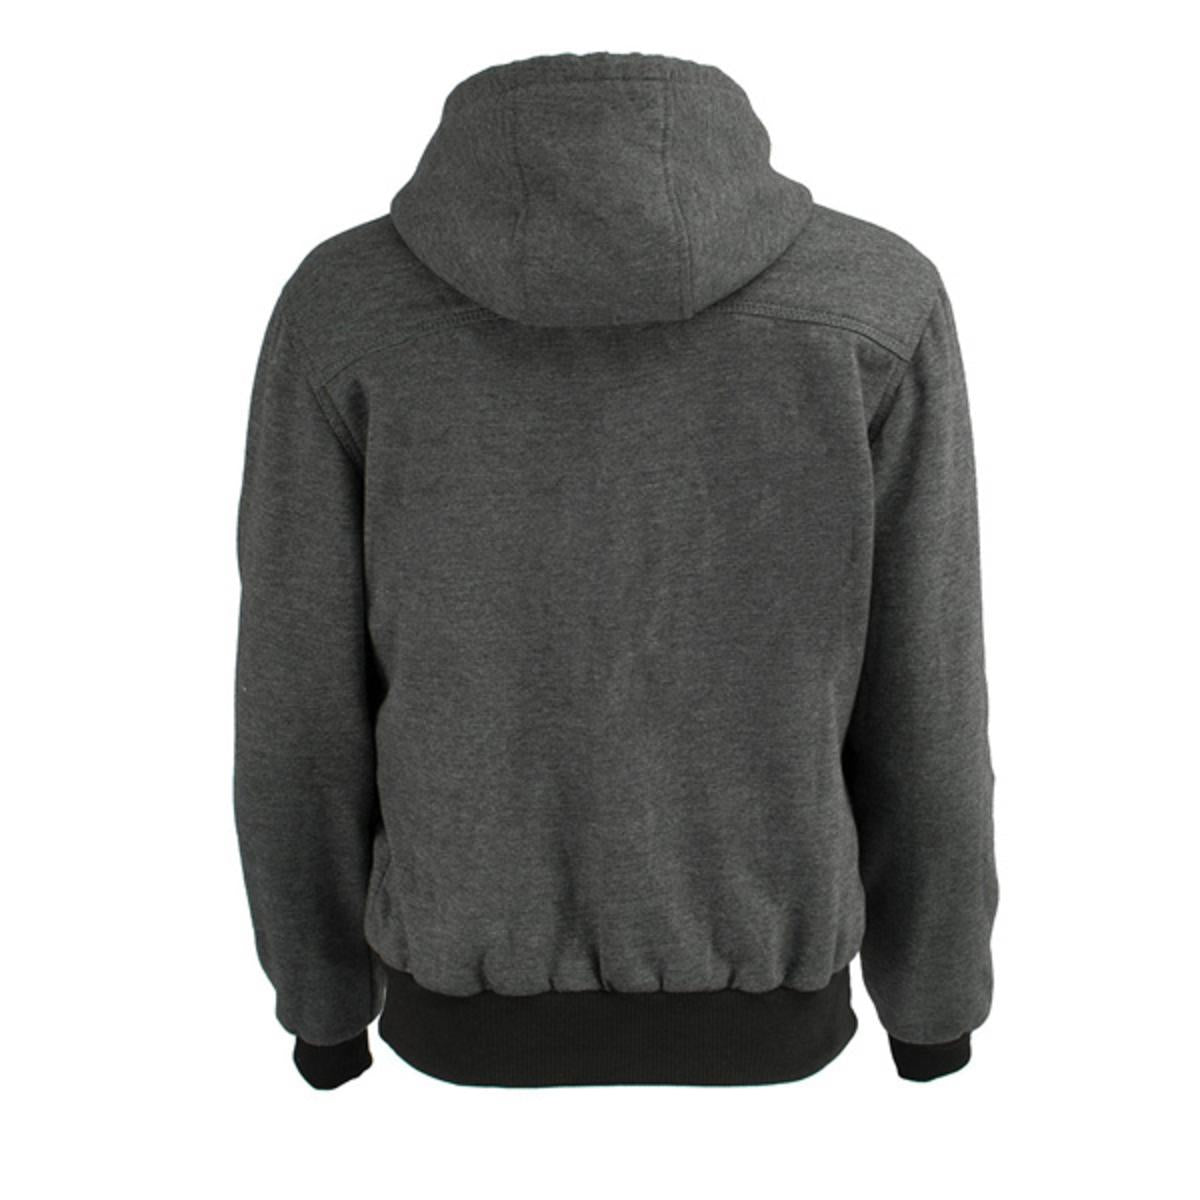 NexGen 7.4V Women's Heated Hoodie with Front & Back Heating Elements